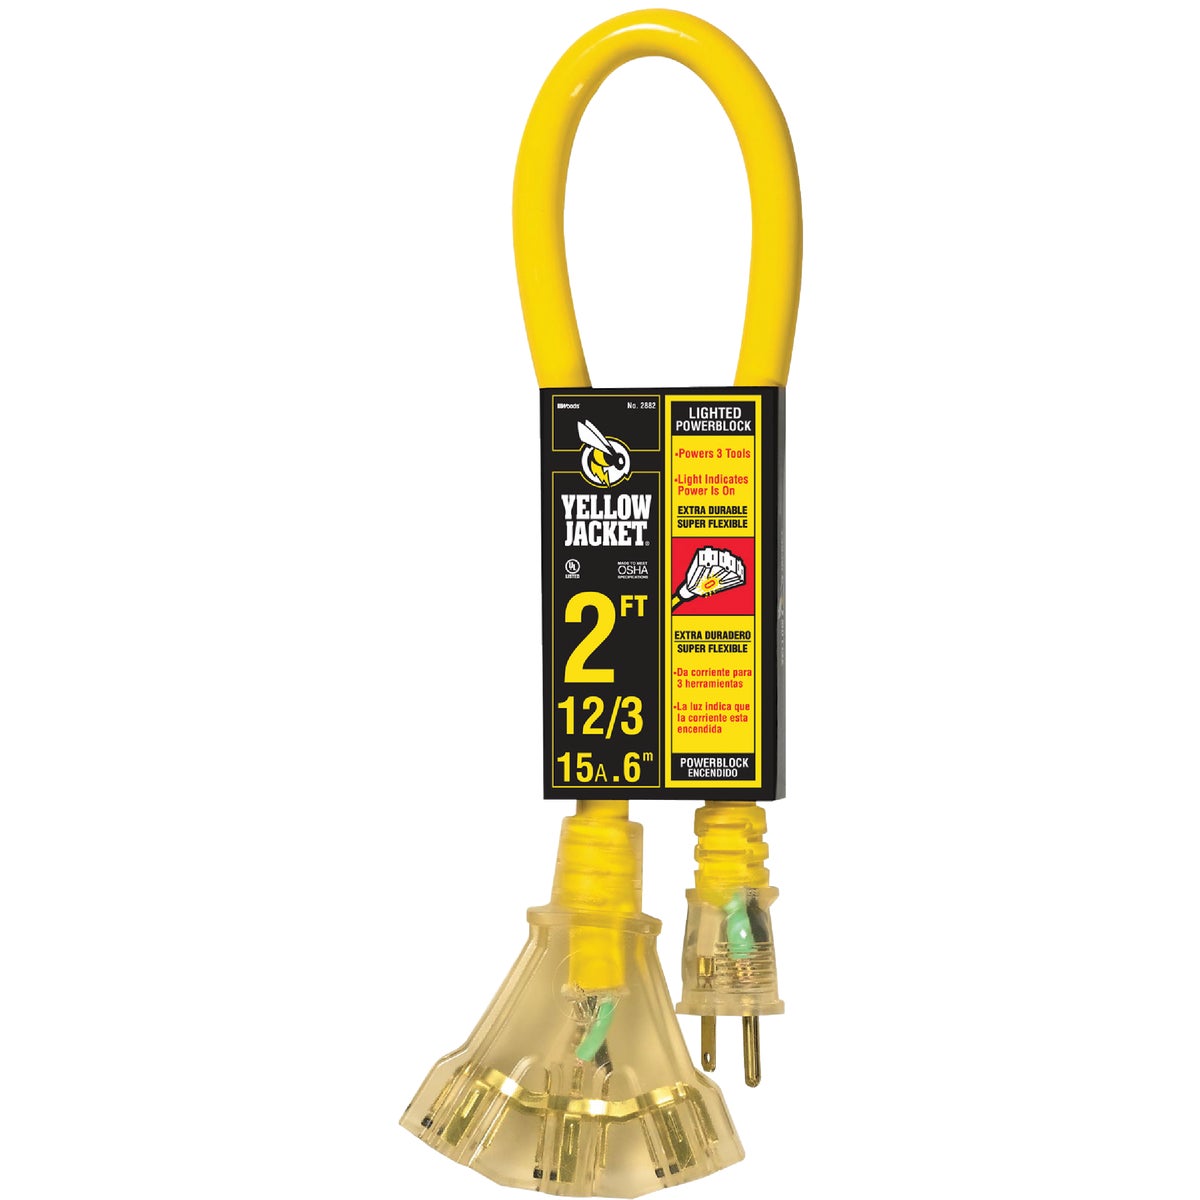 Item 536733, 2 foot Yellow Jacket extremely flexible 3-outlet power block extension cord